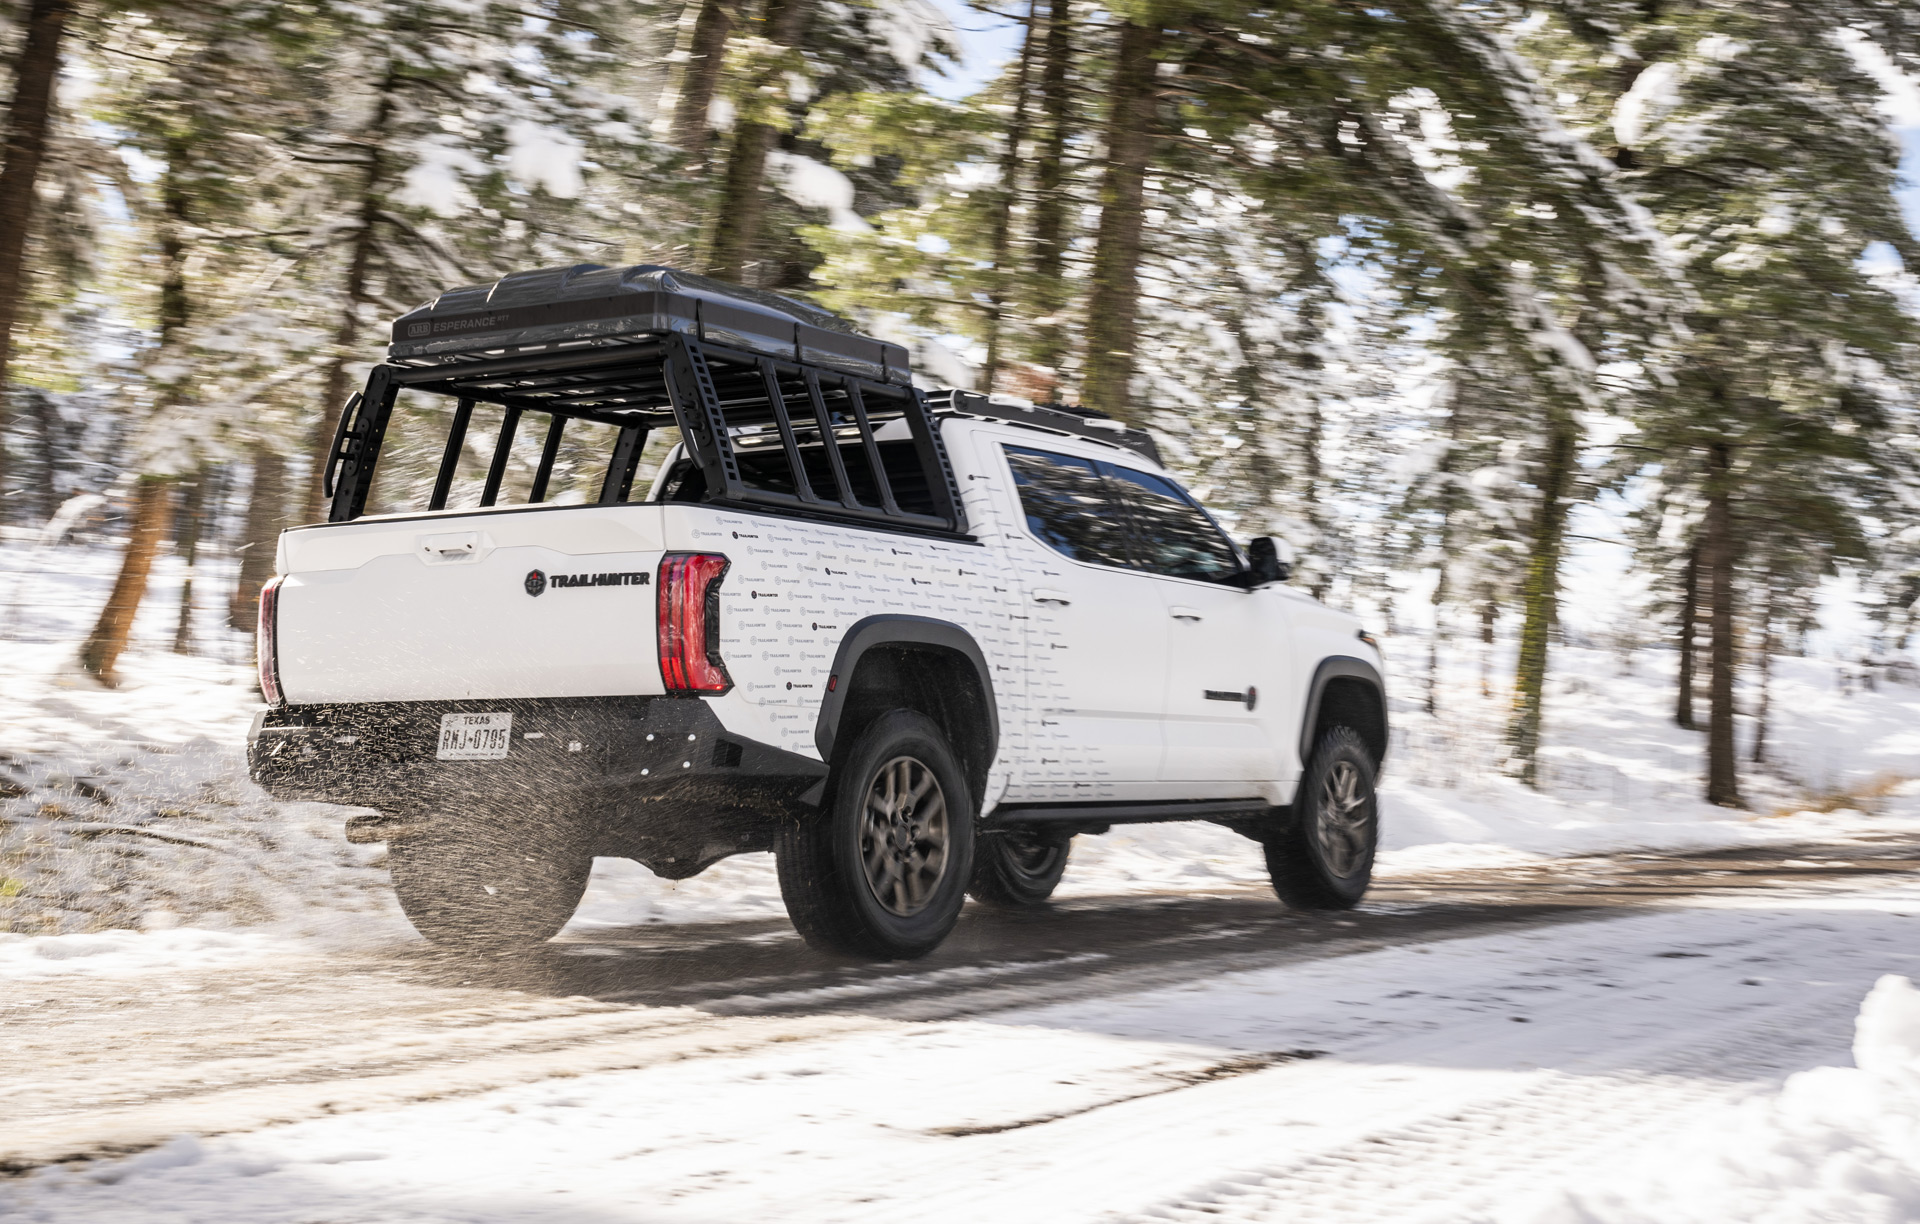 Toyota Trailhunter Aims For Overlanding From The Factory